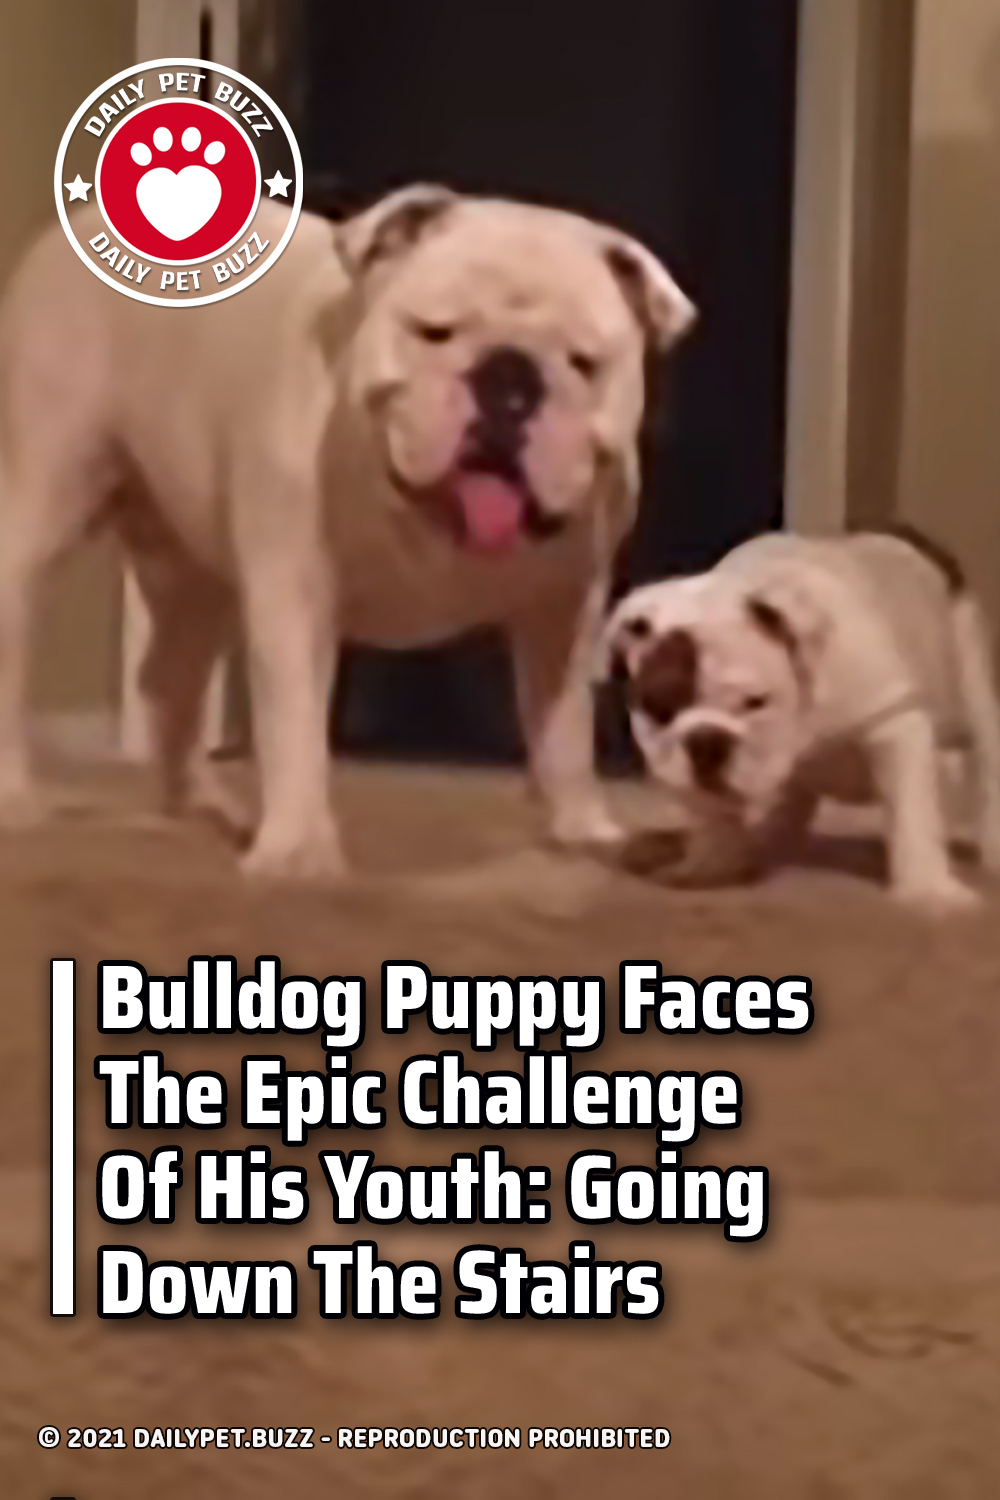 Bulldog Puppy Faces The Epic Challenge Of His Youth: Going Down The Stairs